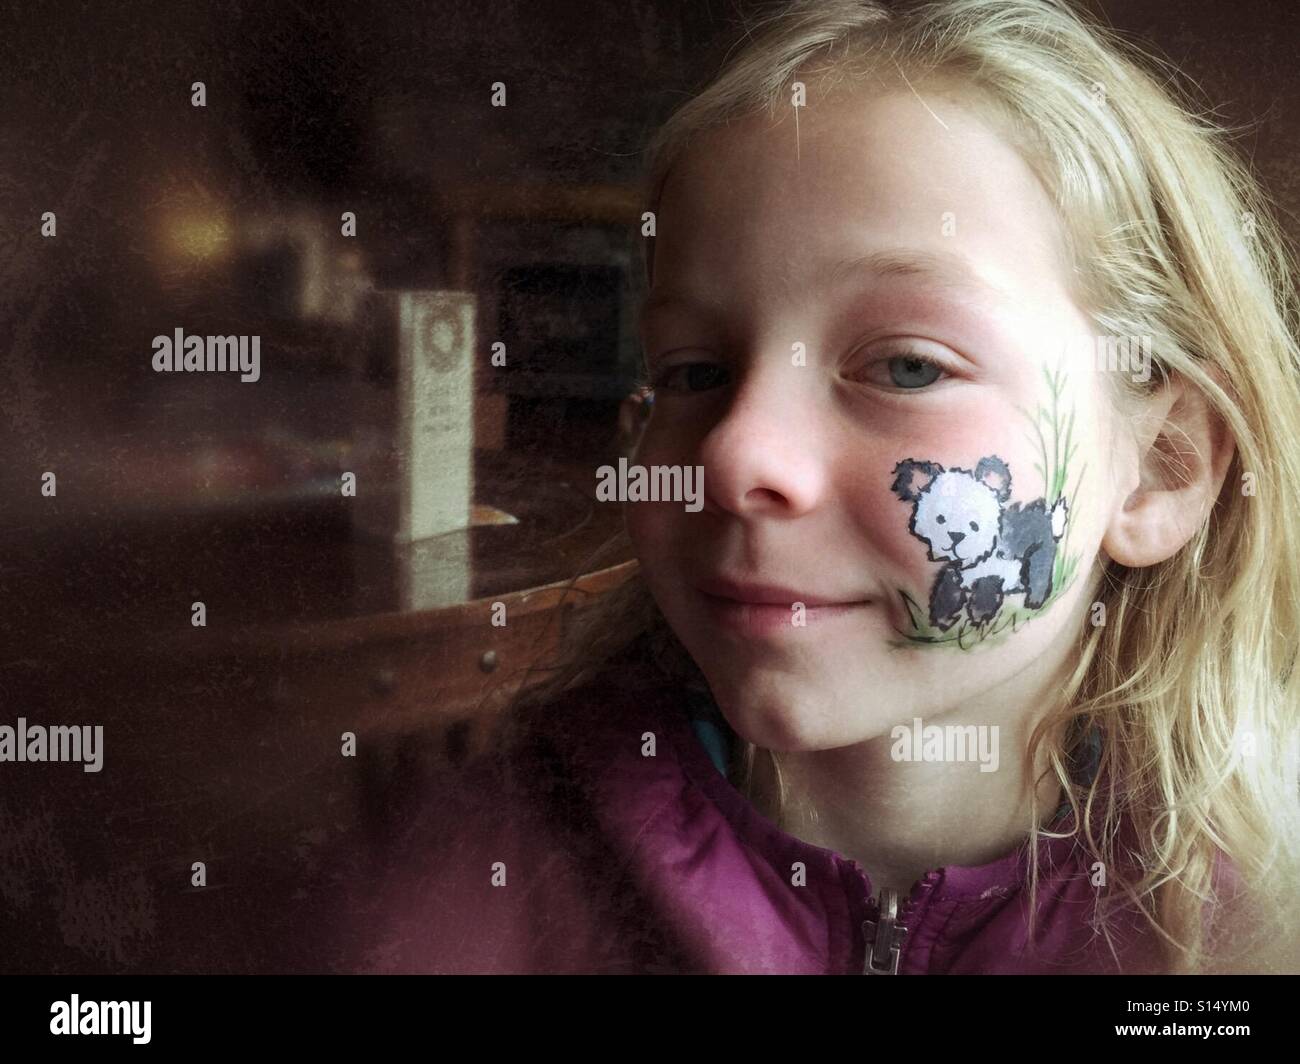 A girl has a panda bear painted on her cheek. Stock Photo